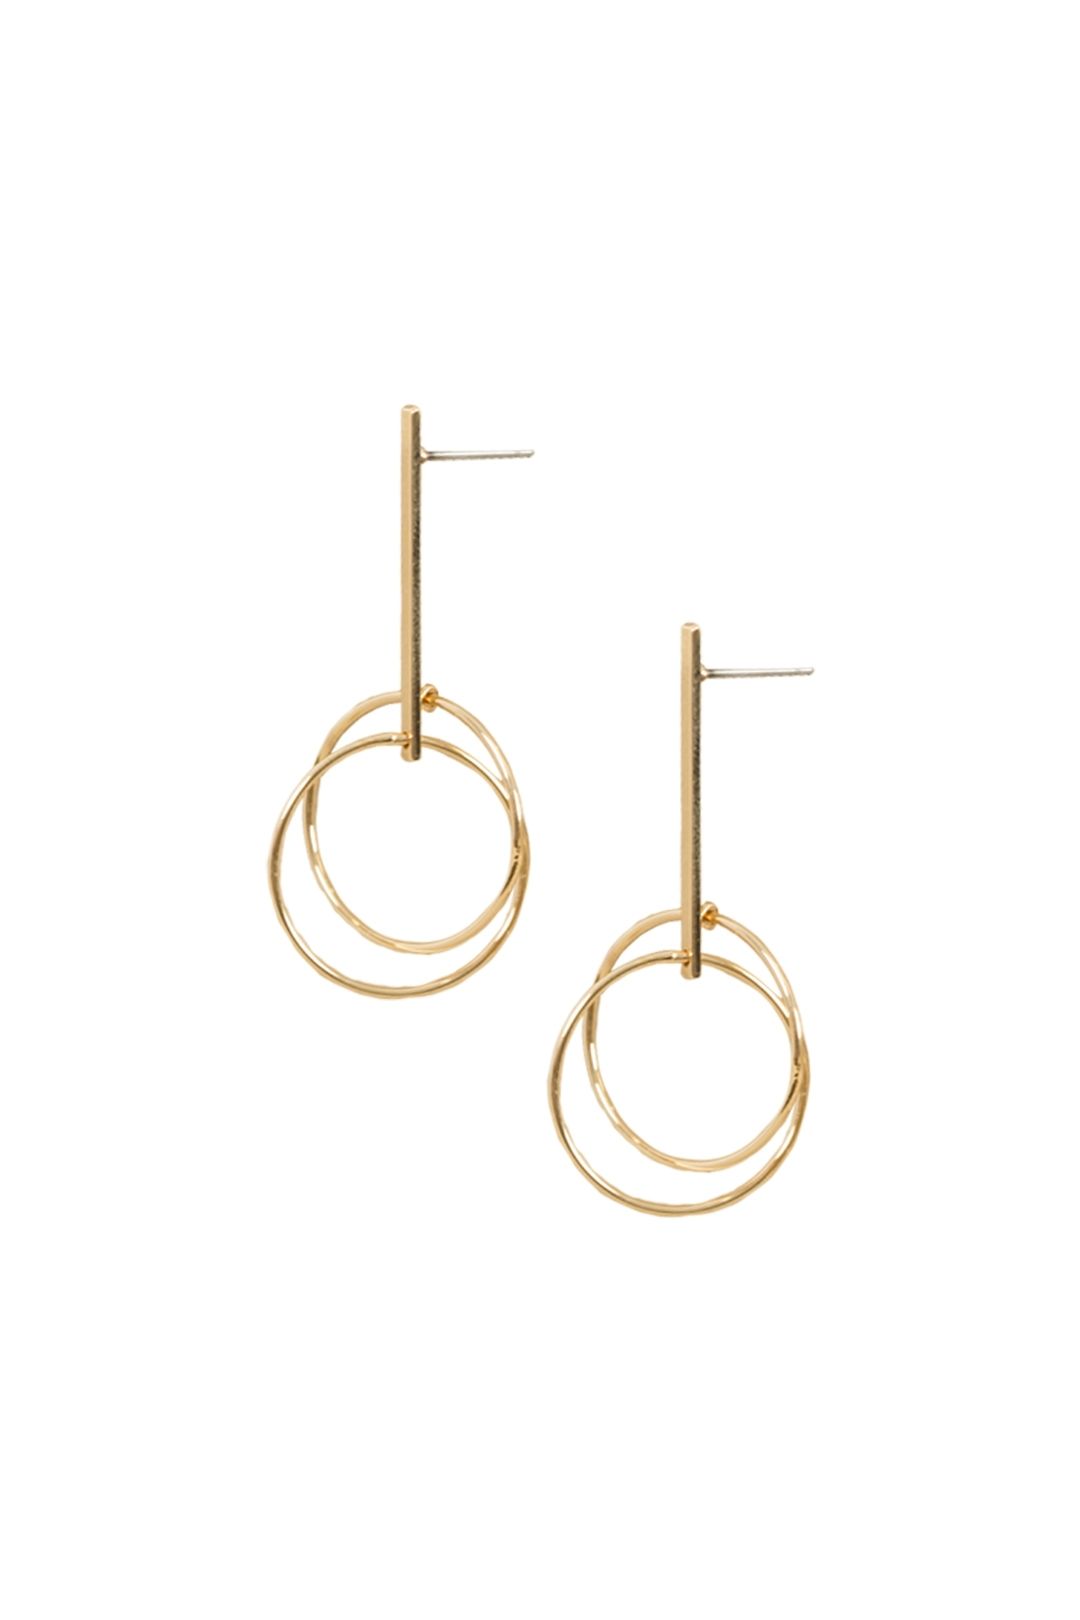 Adorne - Axis Rod Drop Stud Earrings - Gold - Front